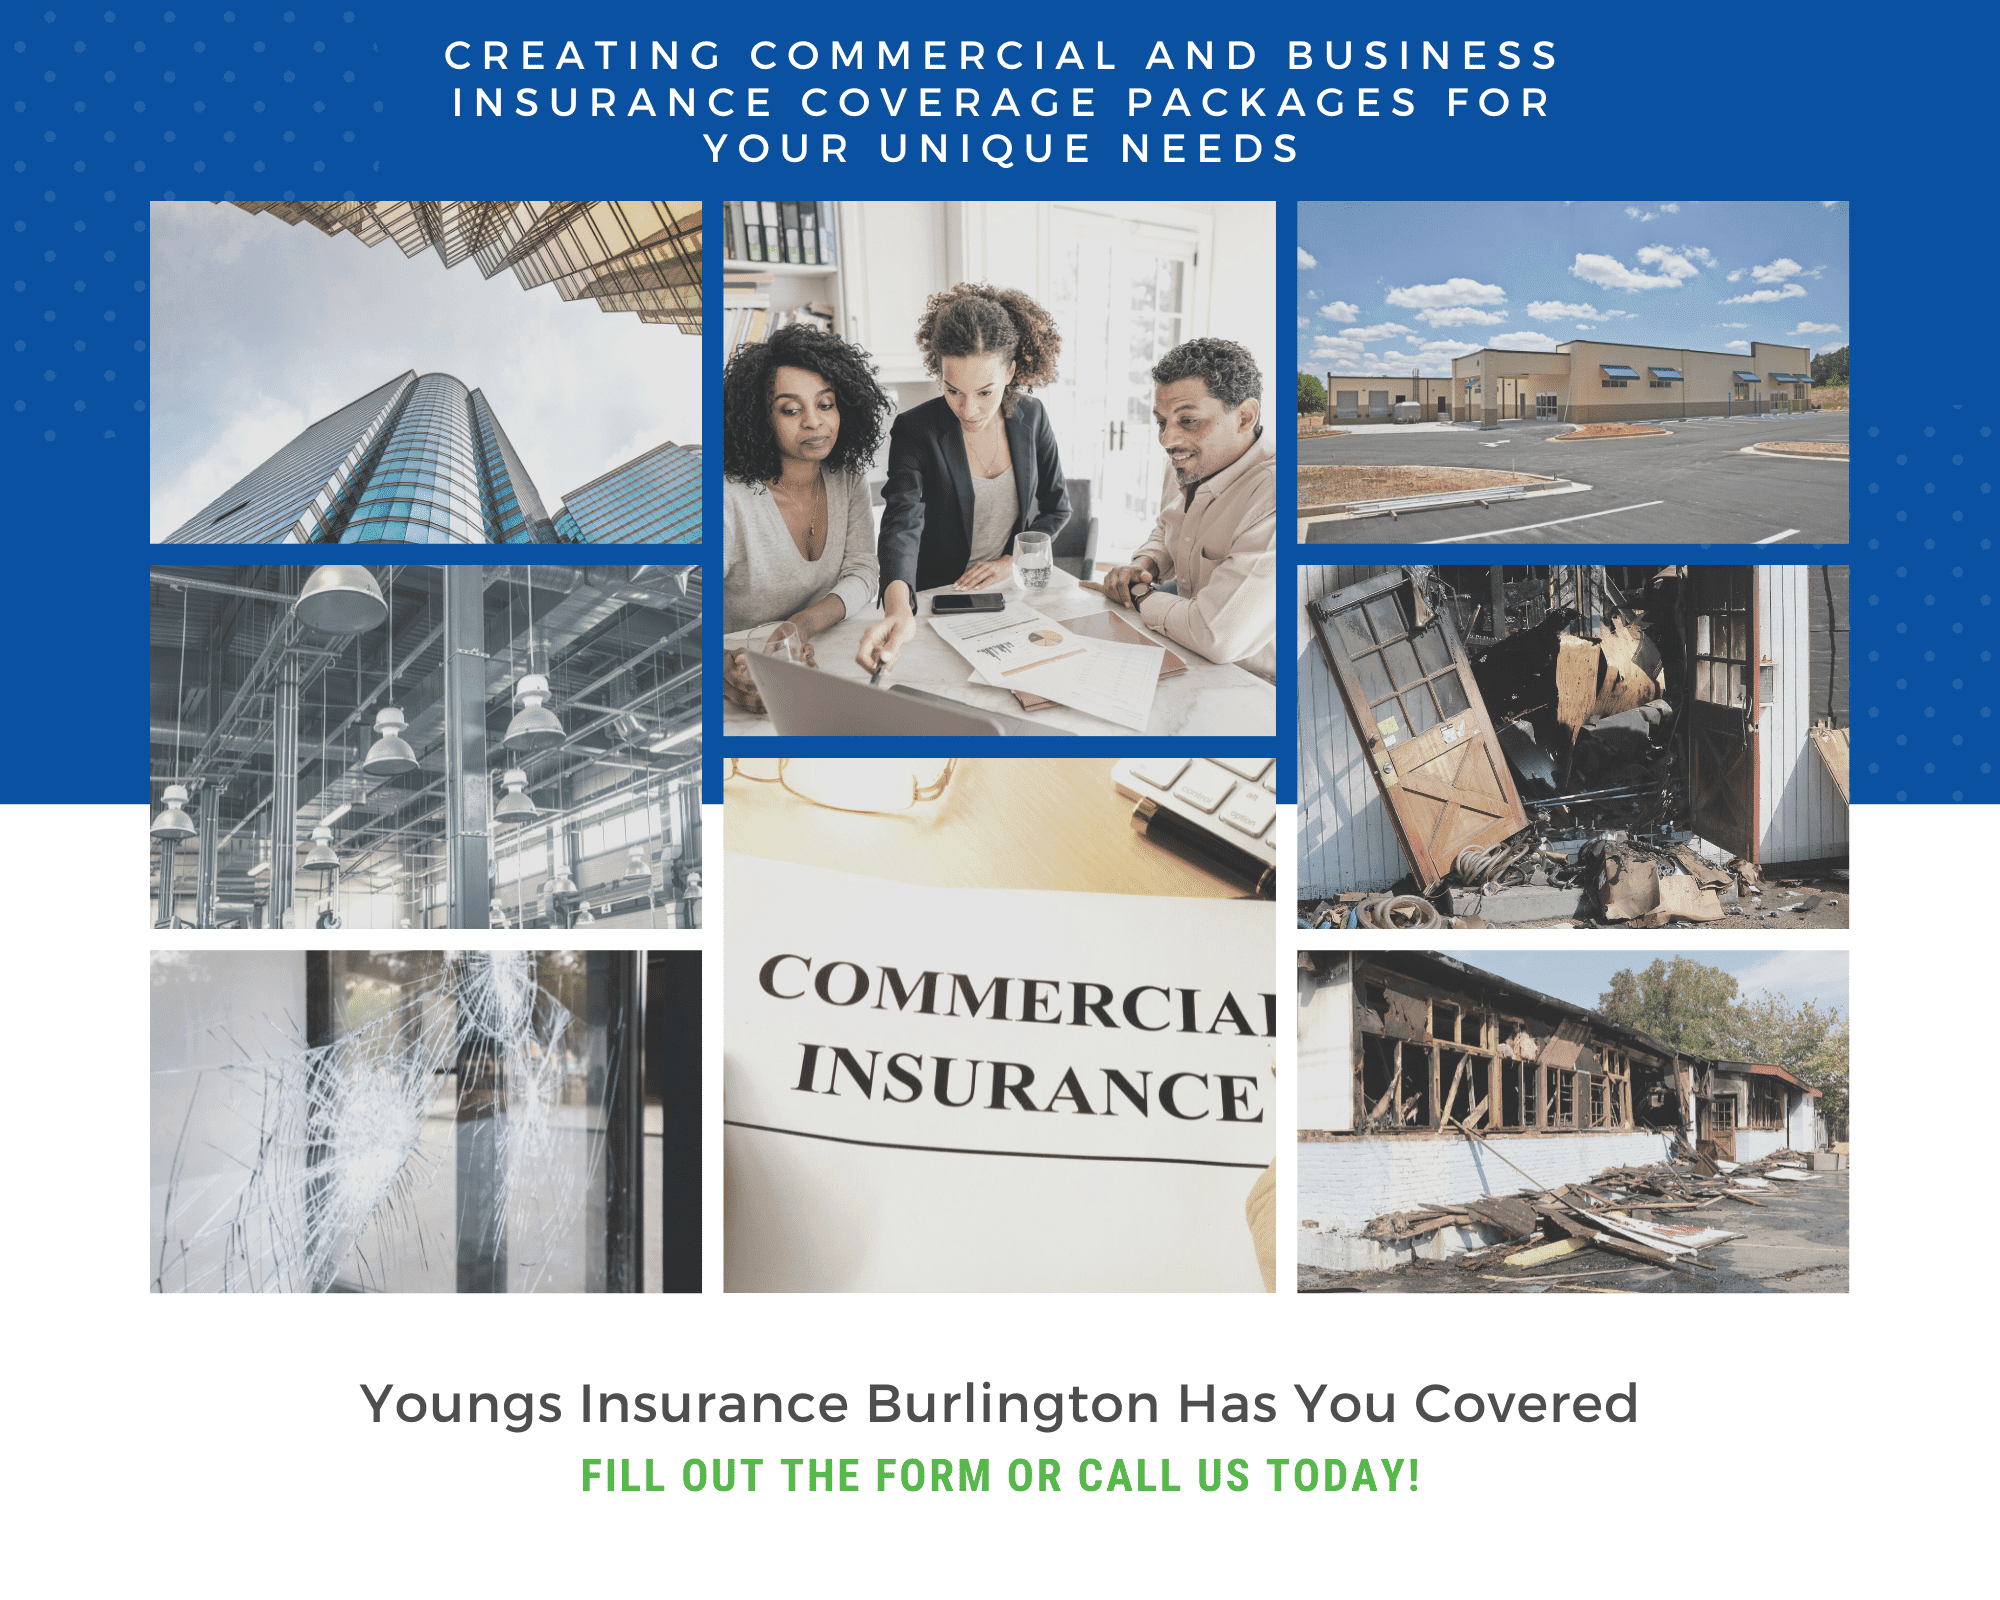 Creating Commercial and Business Insurance Coverage Packages For Your Unique Needs